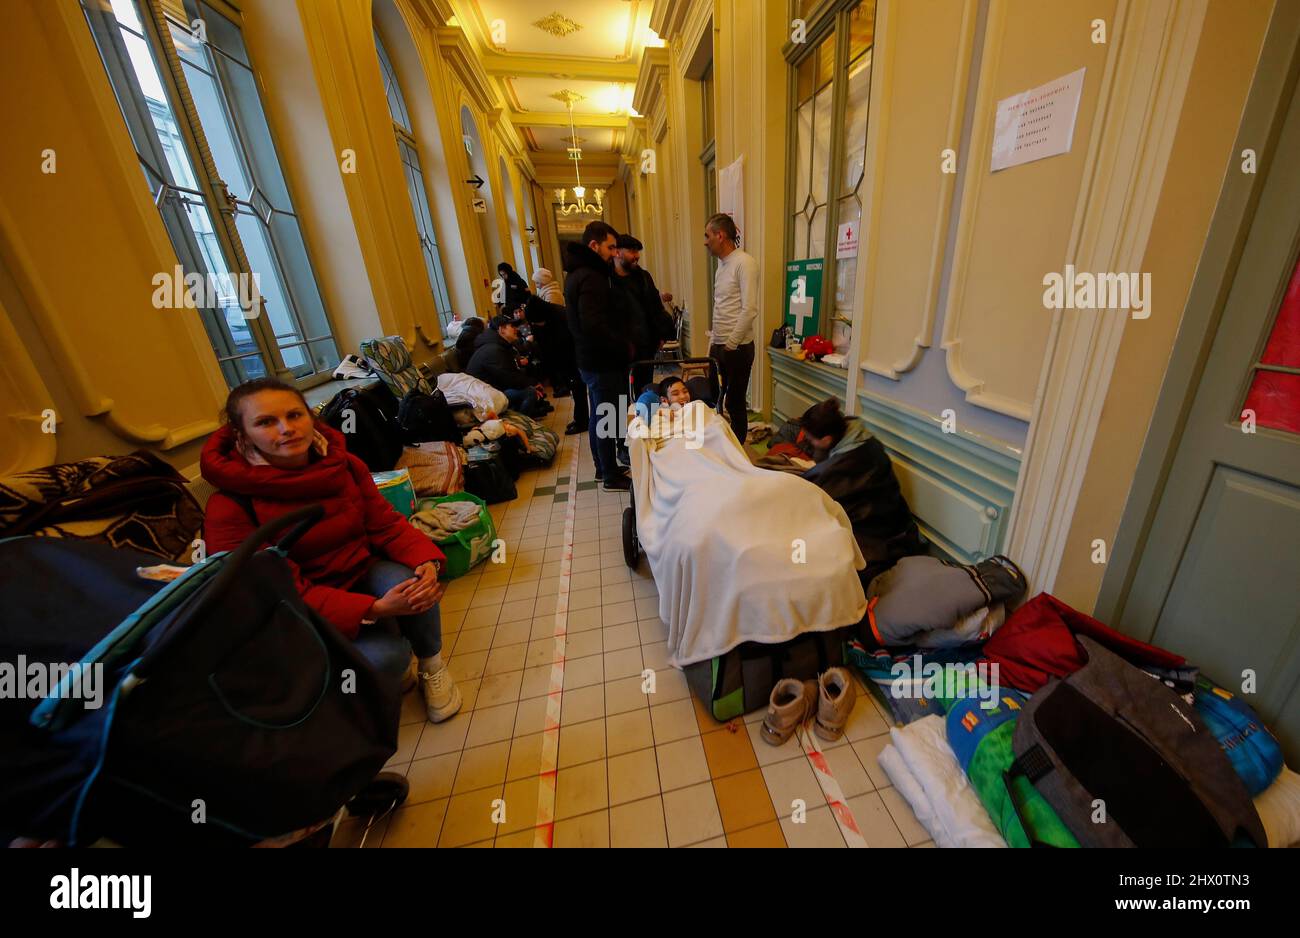 Poland, 08/03/2022, Civilians from Ukraine depart from Przemysl railway station in Poland, by train to reach other Polish cities due to the ongoing Russian attacks on Ukraine. Stock Photo